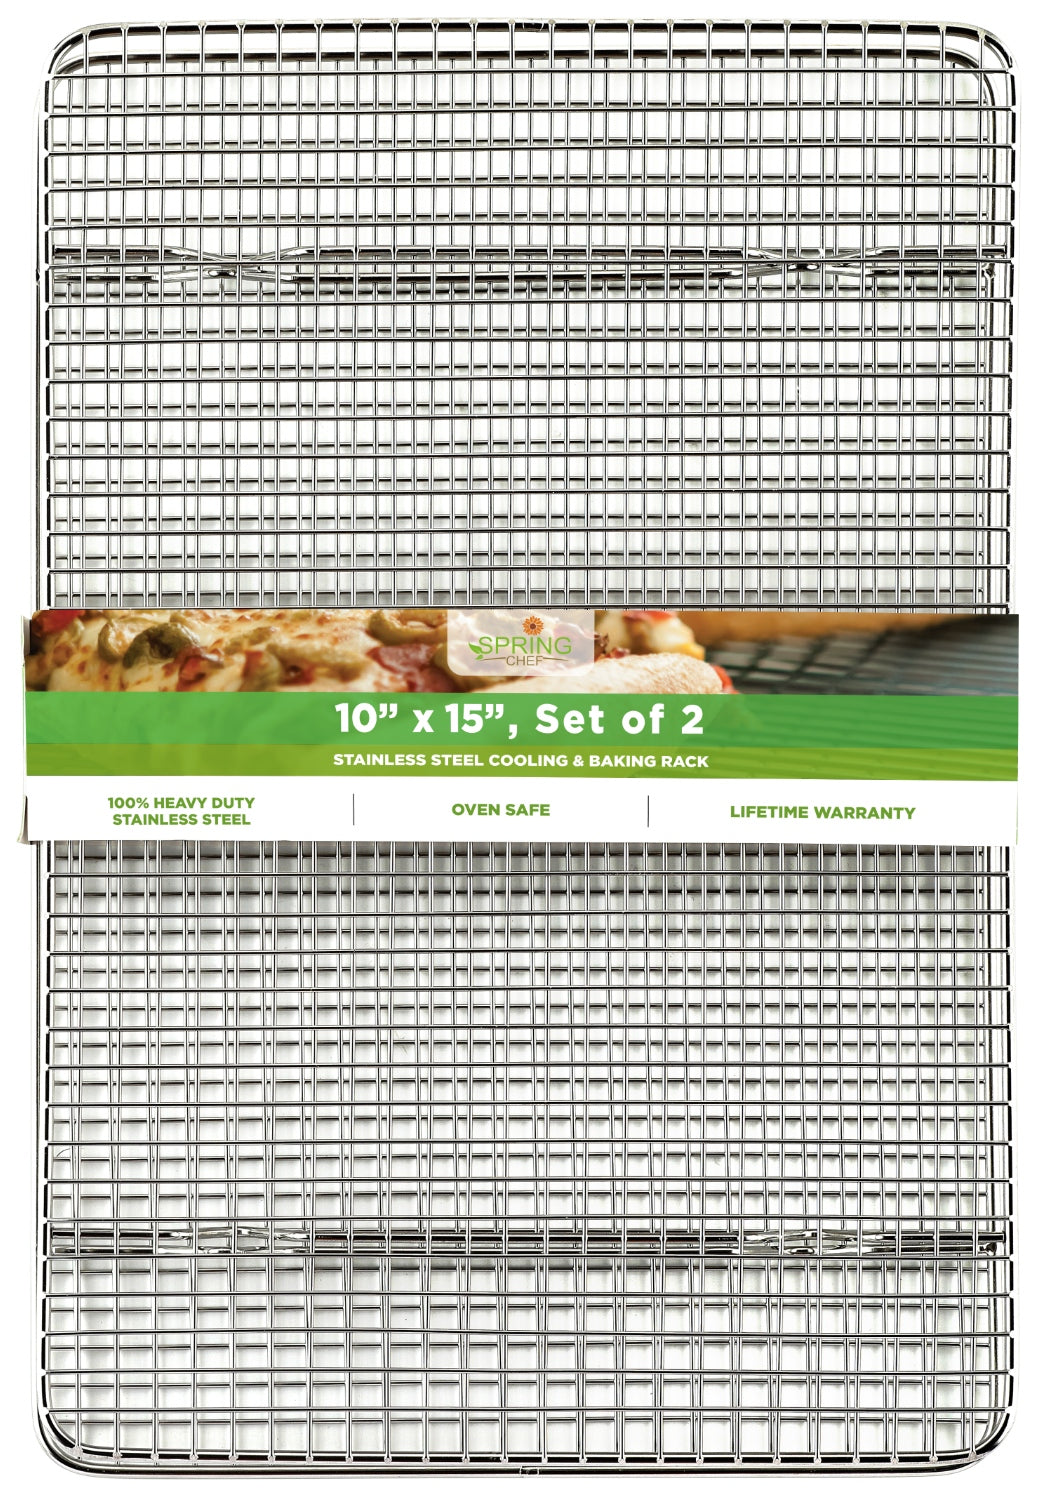 NEW Cooling Rack - Set of 2 Stainless Steel, Oven Safe Grid Wire Racks -  10x15